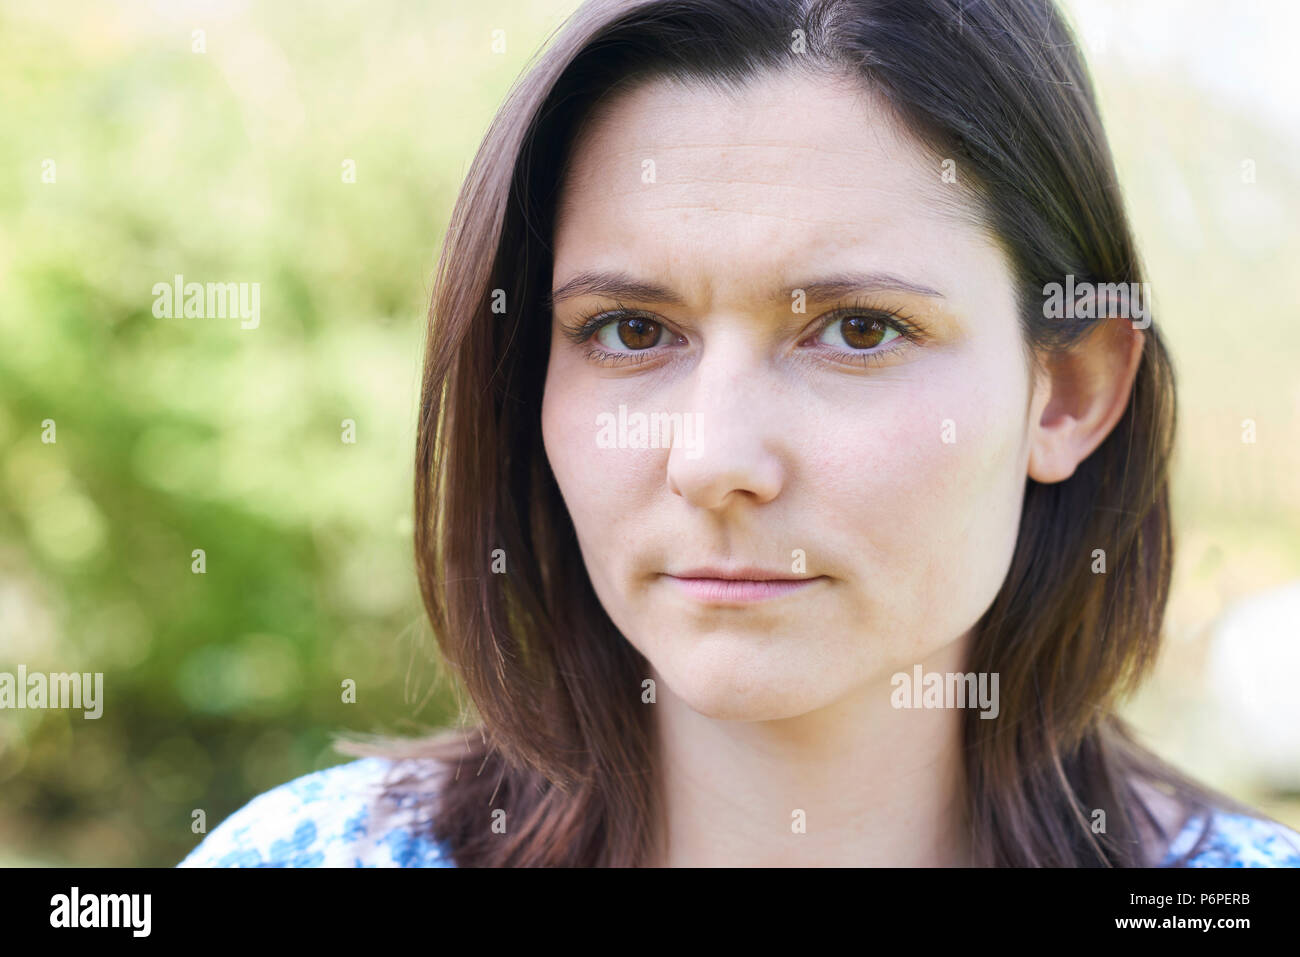 Outdoor Head And Shoulder Portrait Of Worried Young Woman Stock Photo